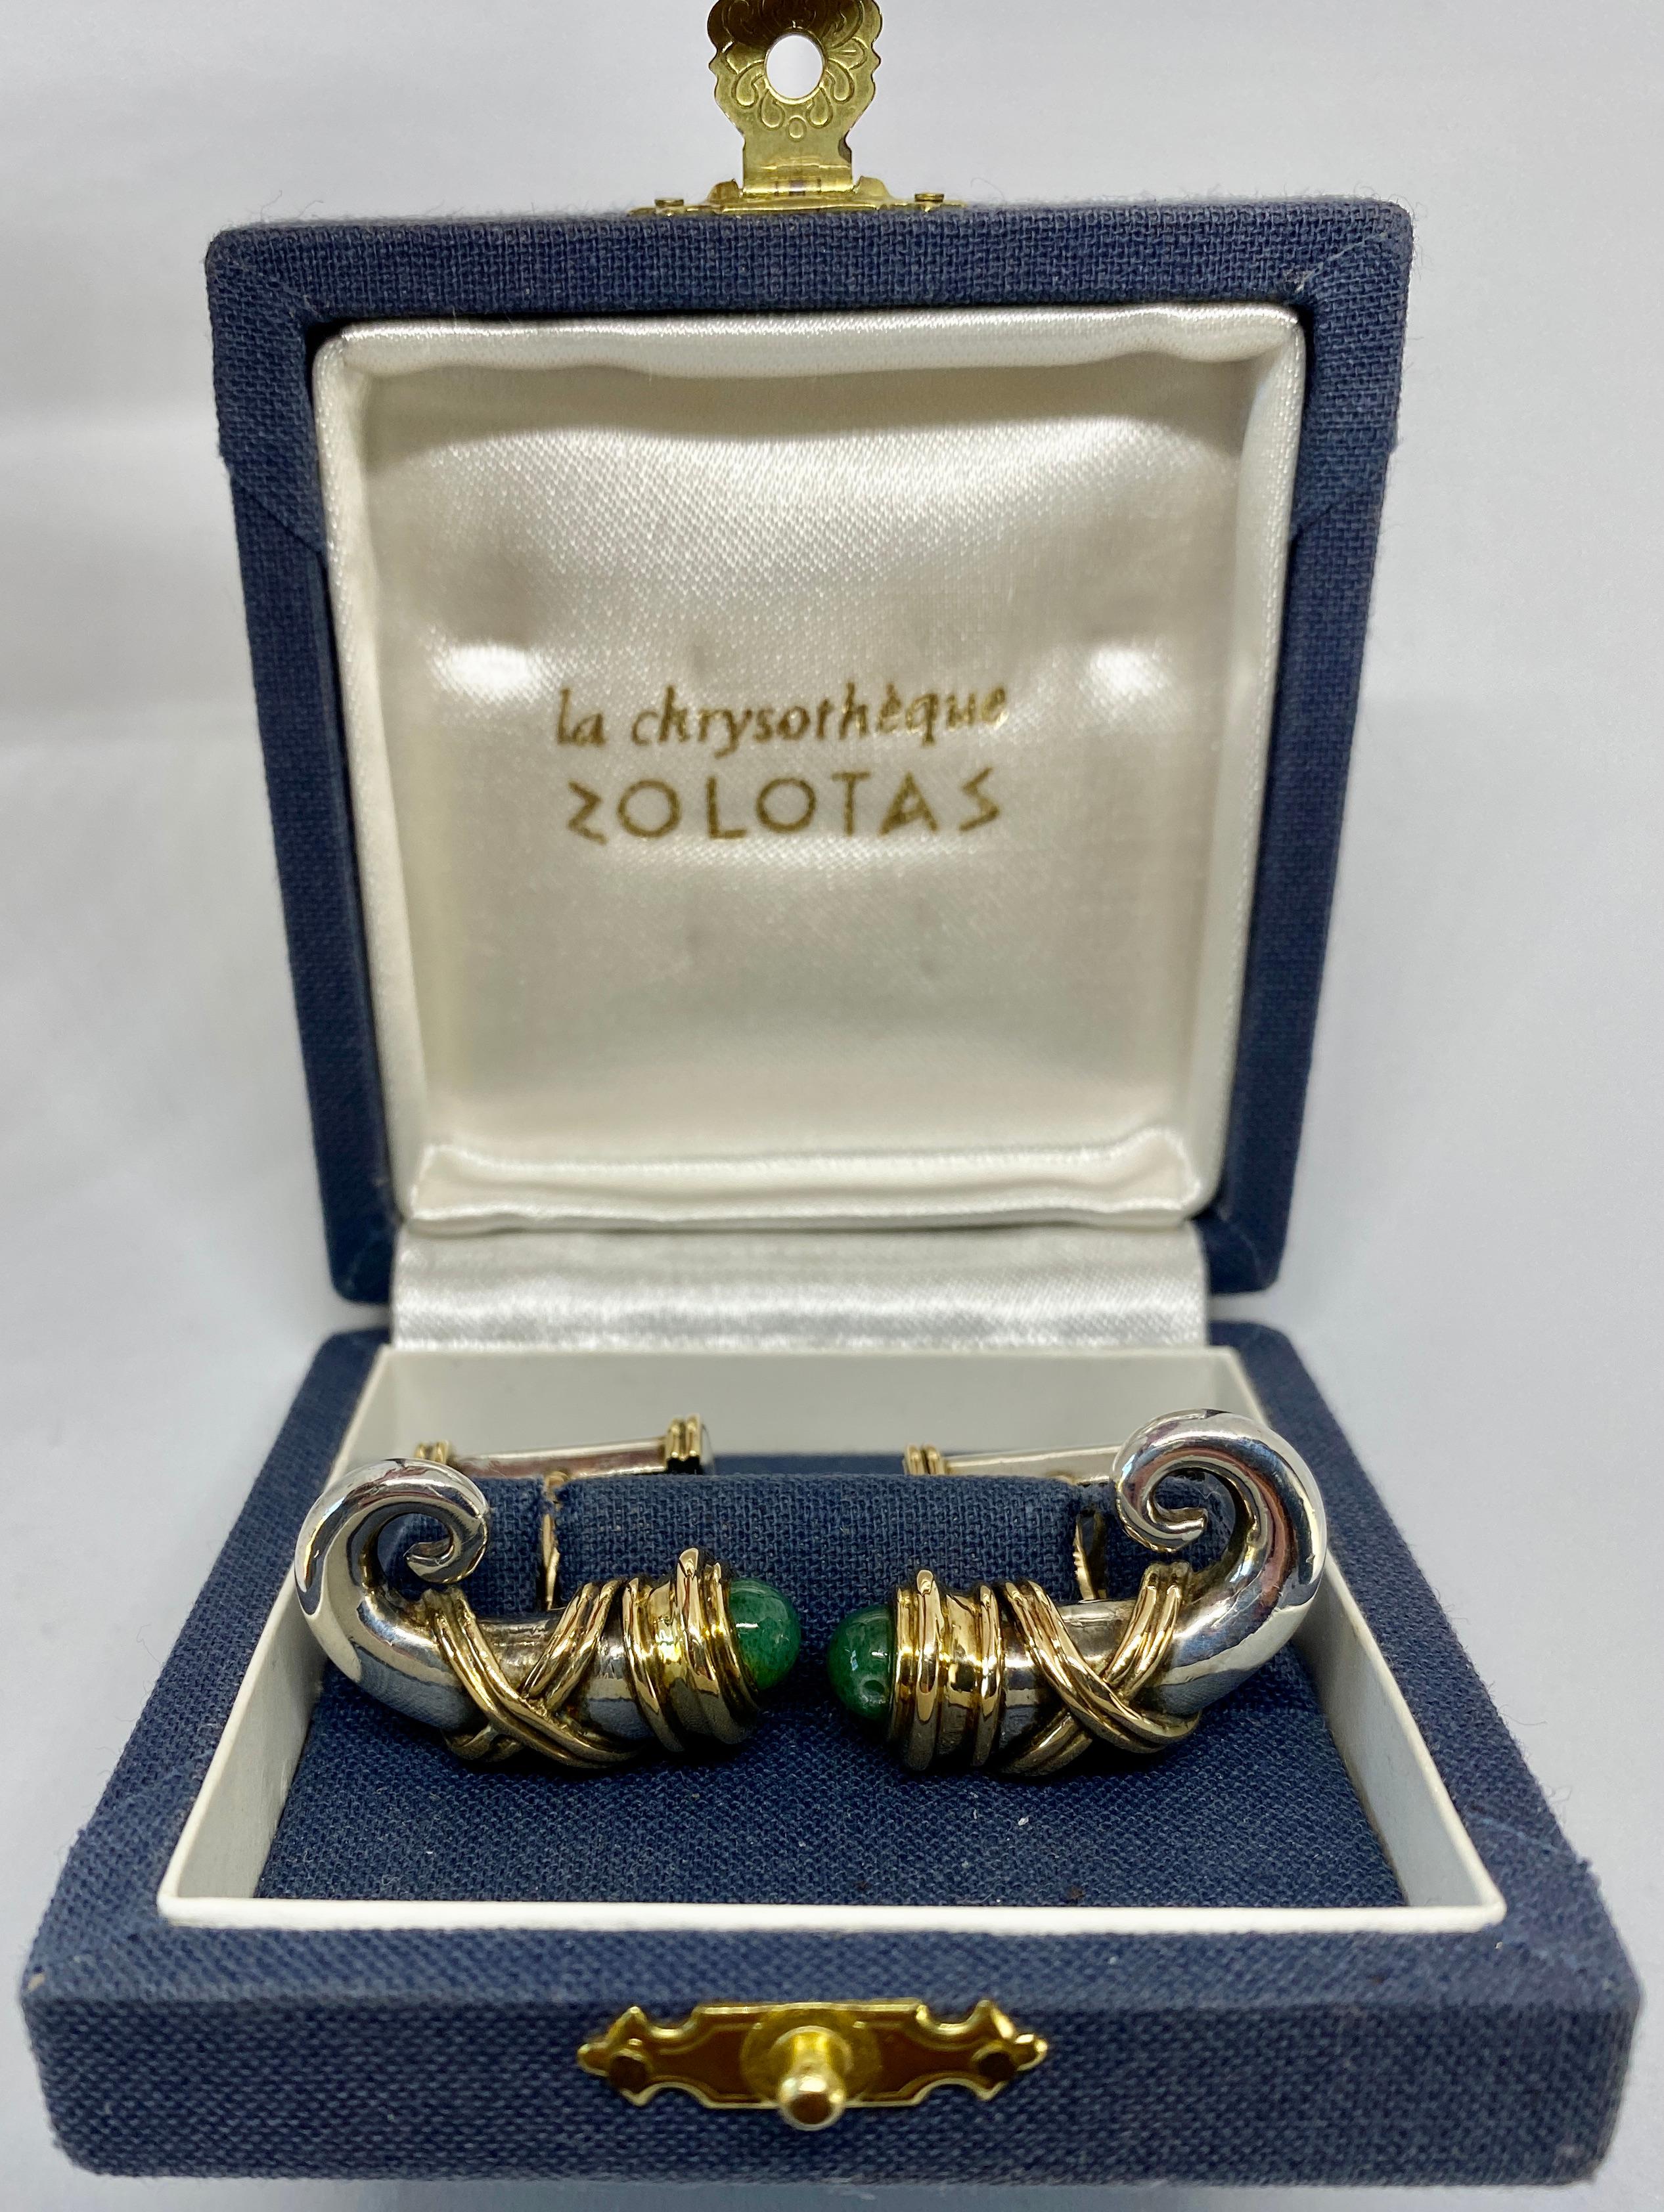 Founded in the 19th Century, the house of Zolotas is among the world's most esteemed jewelers, with a particular specialty in the revival of ancient Greek designs and techniques.

These cufflinks are a rare and wonderful example. Rendered in 18K